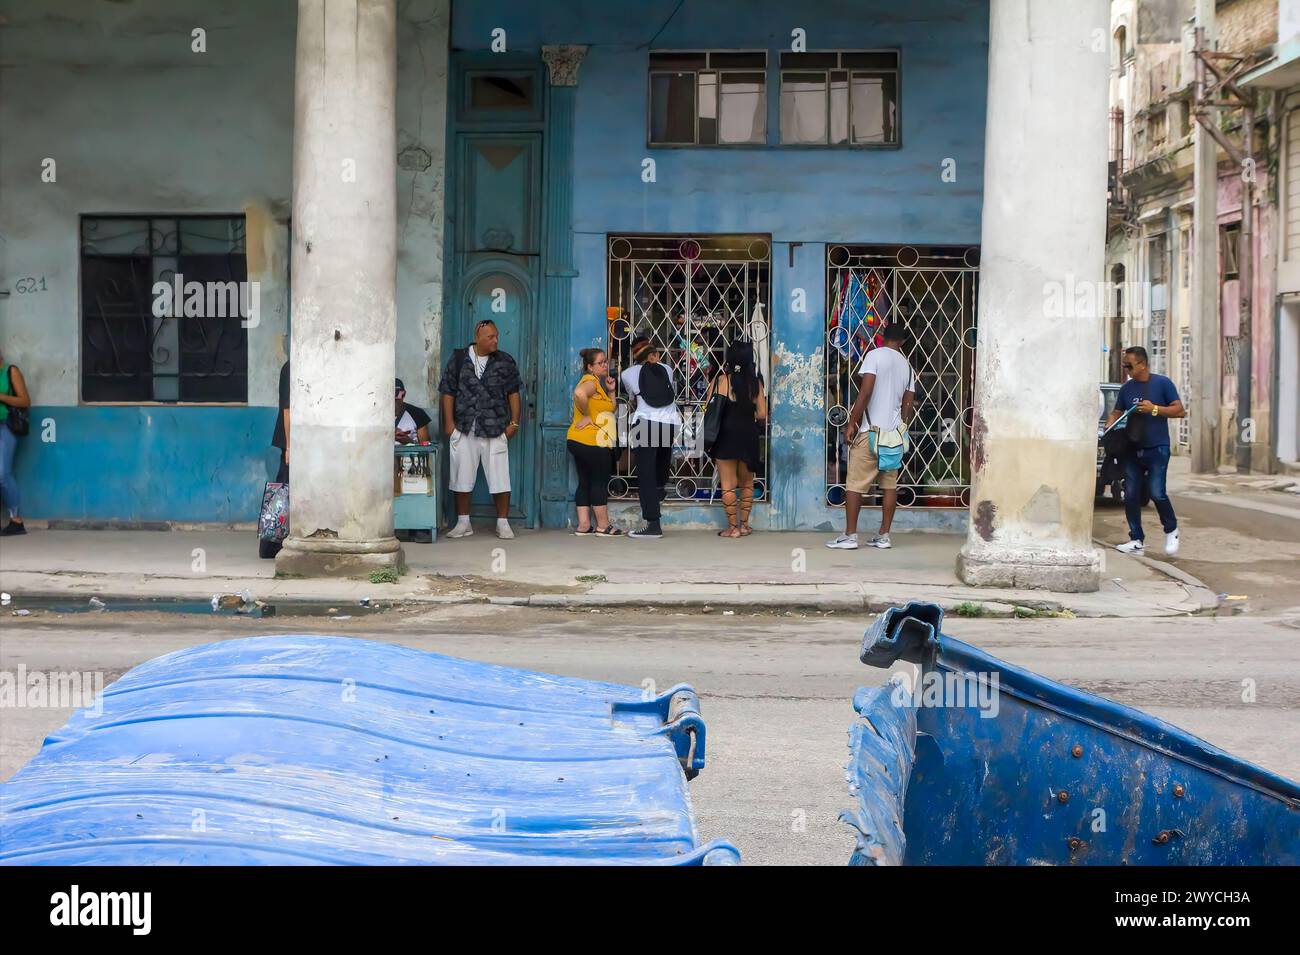 Cuban people buying from a small business in a house in Havana, Cuba Stock Photo